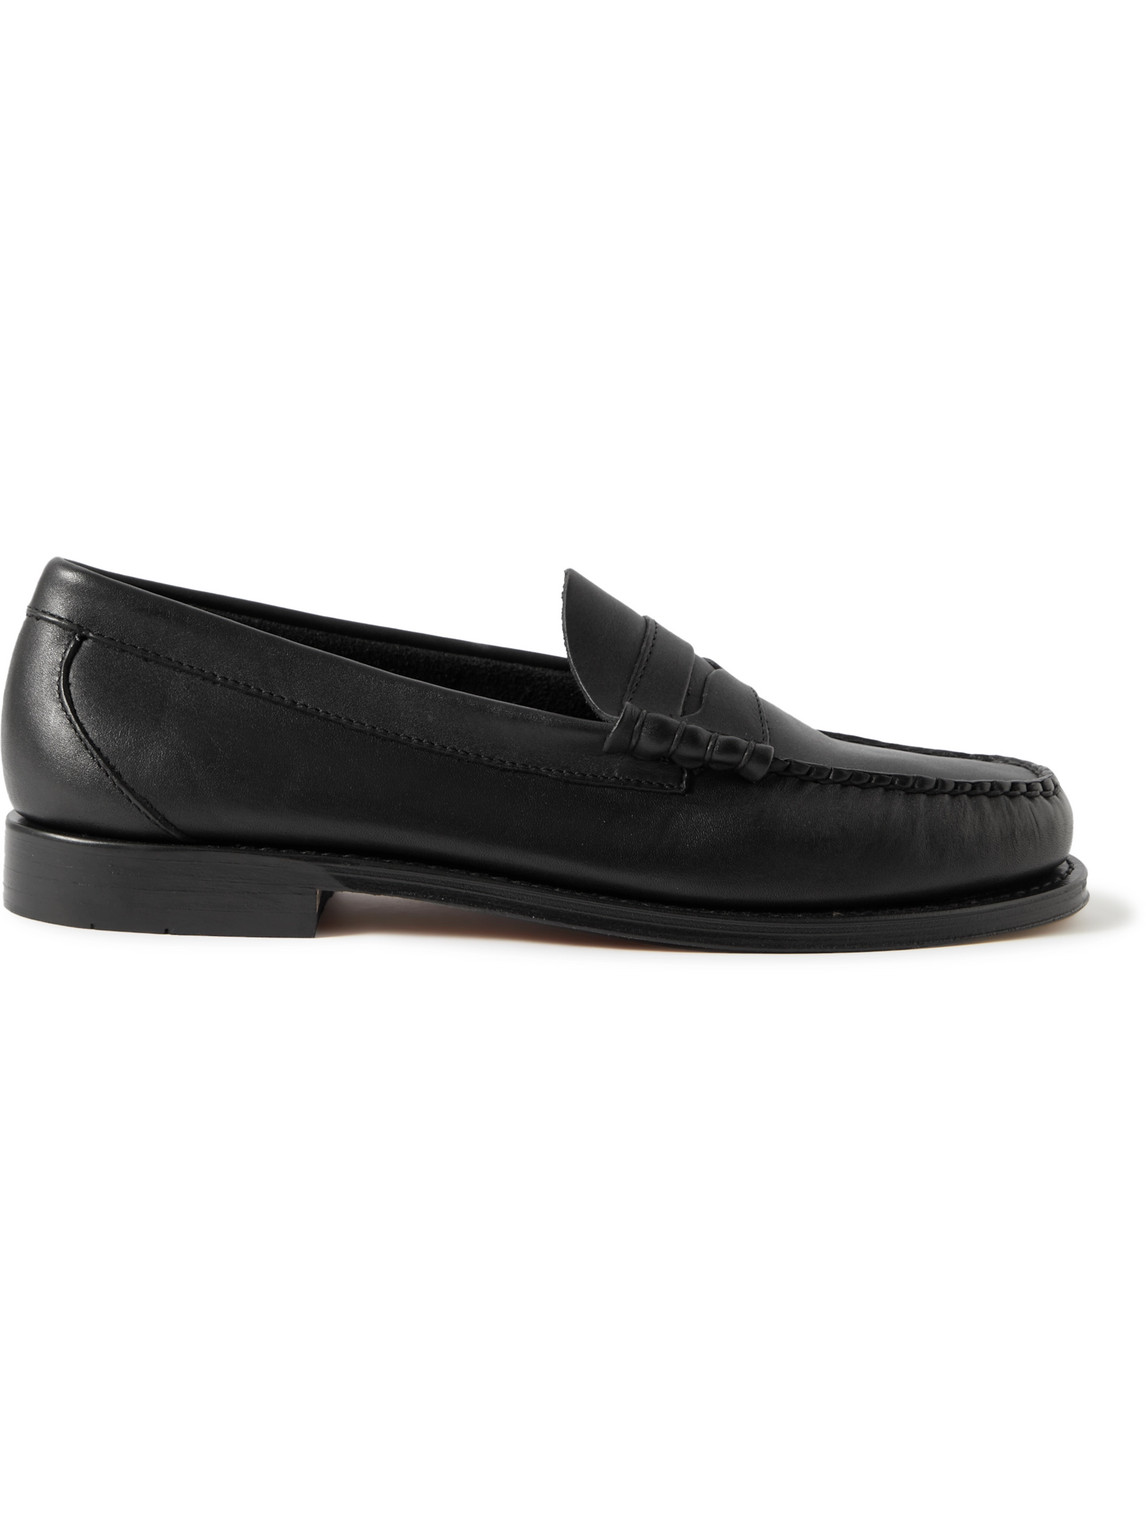 G.h. Bass & Co. Weejuns Heritage Larson Leather Penny Loafers In Black